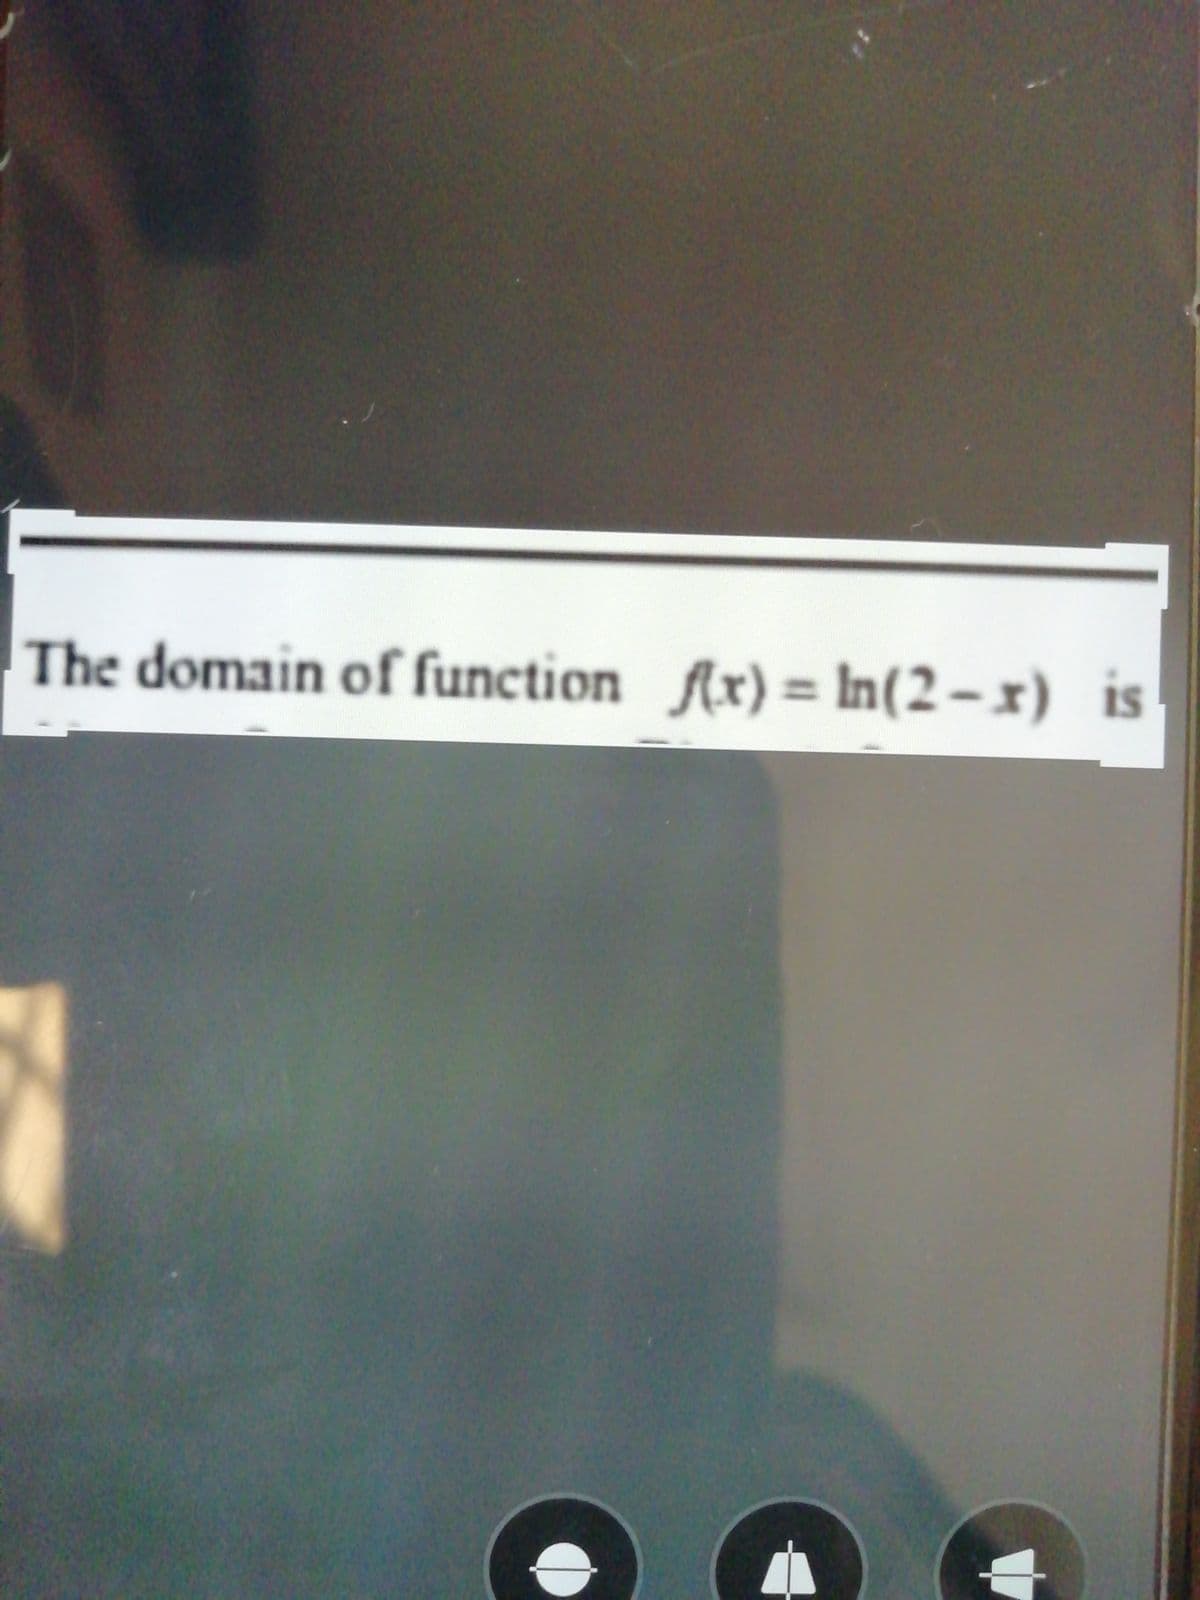 The domain of function Ax) = In(2 – x) is
%3D
